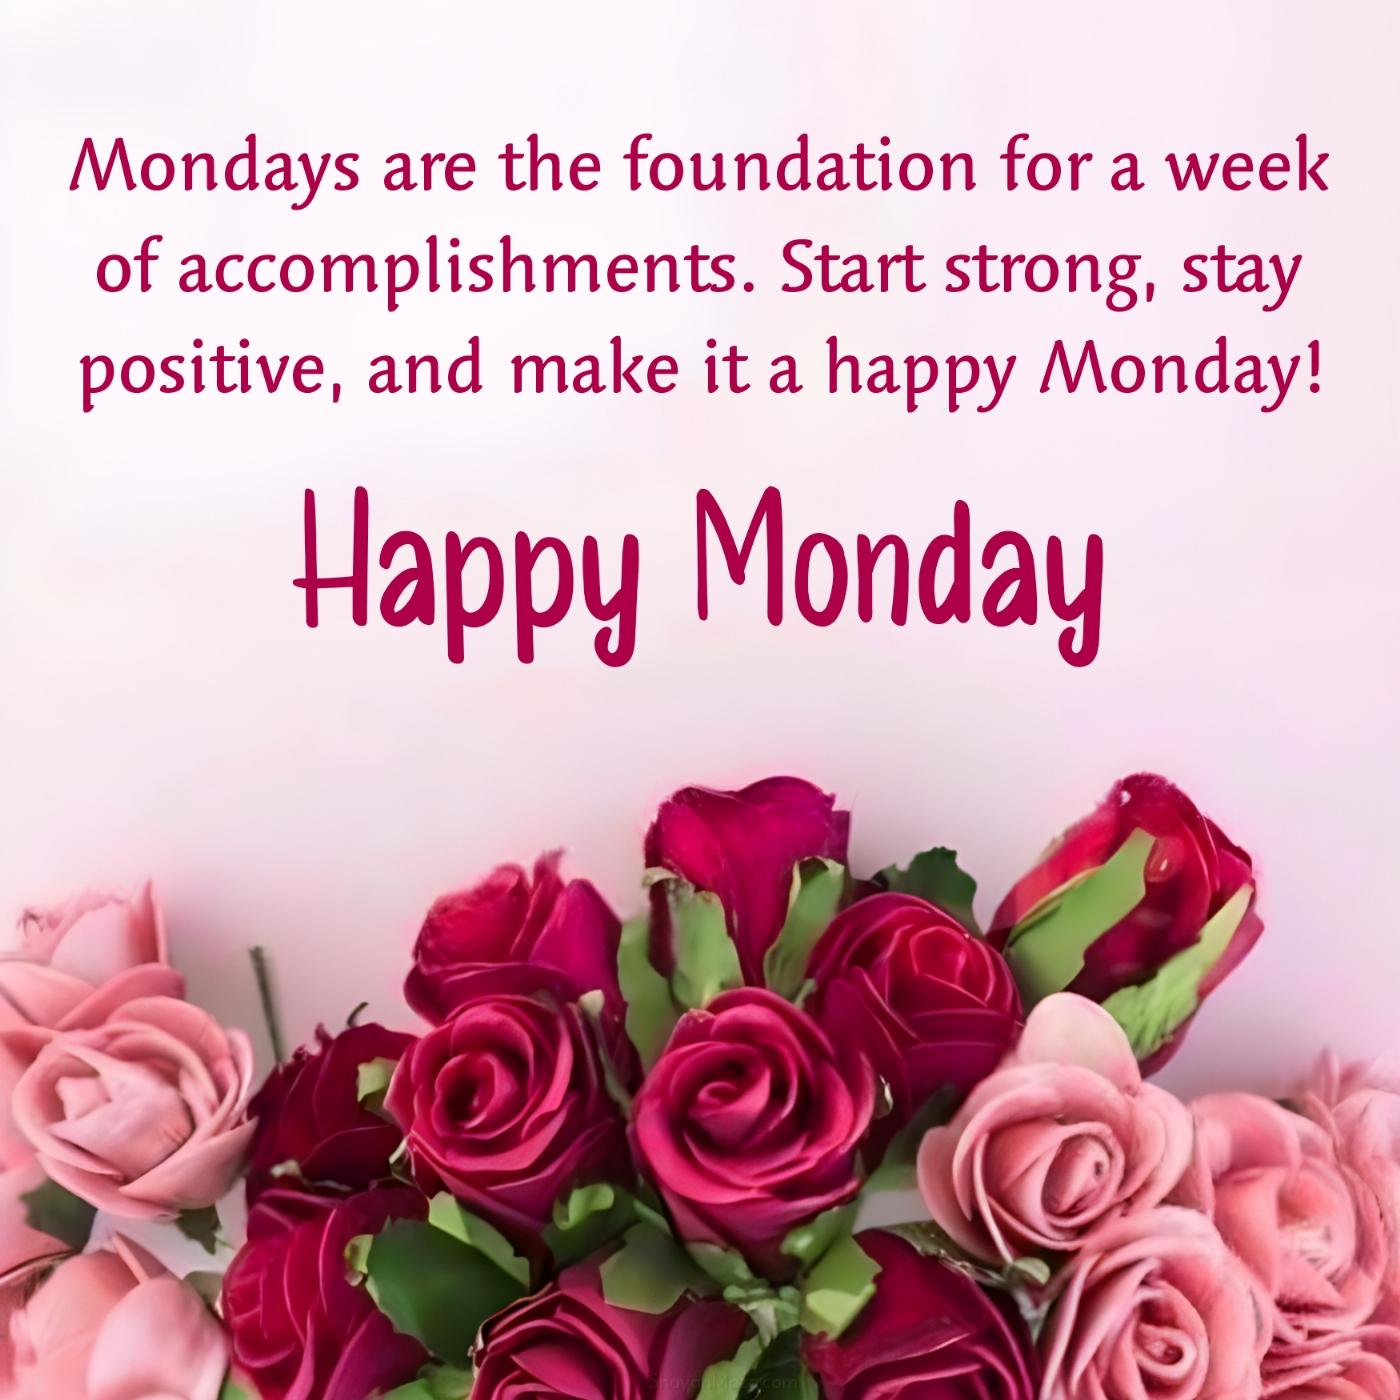 Mondays are the foundation for a week of accomplishments